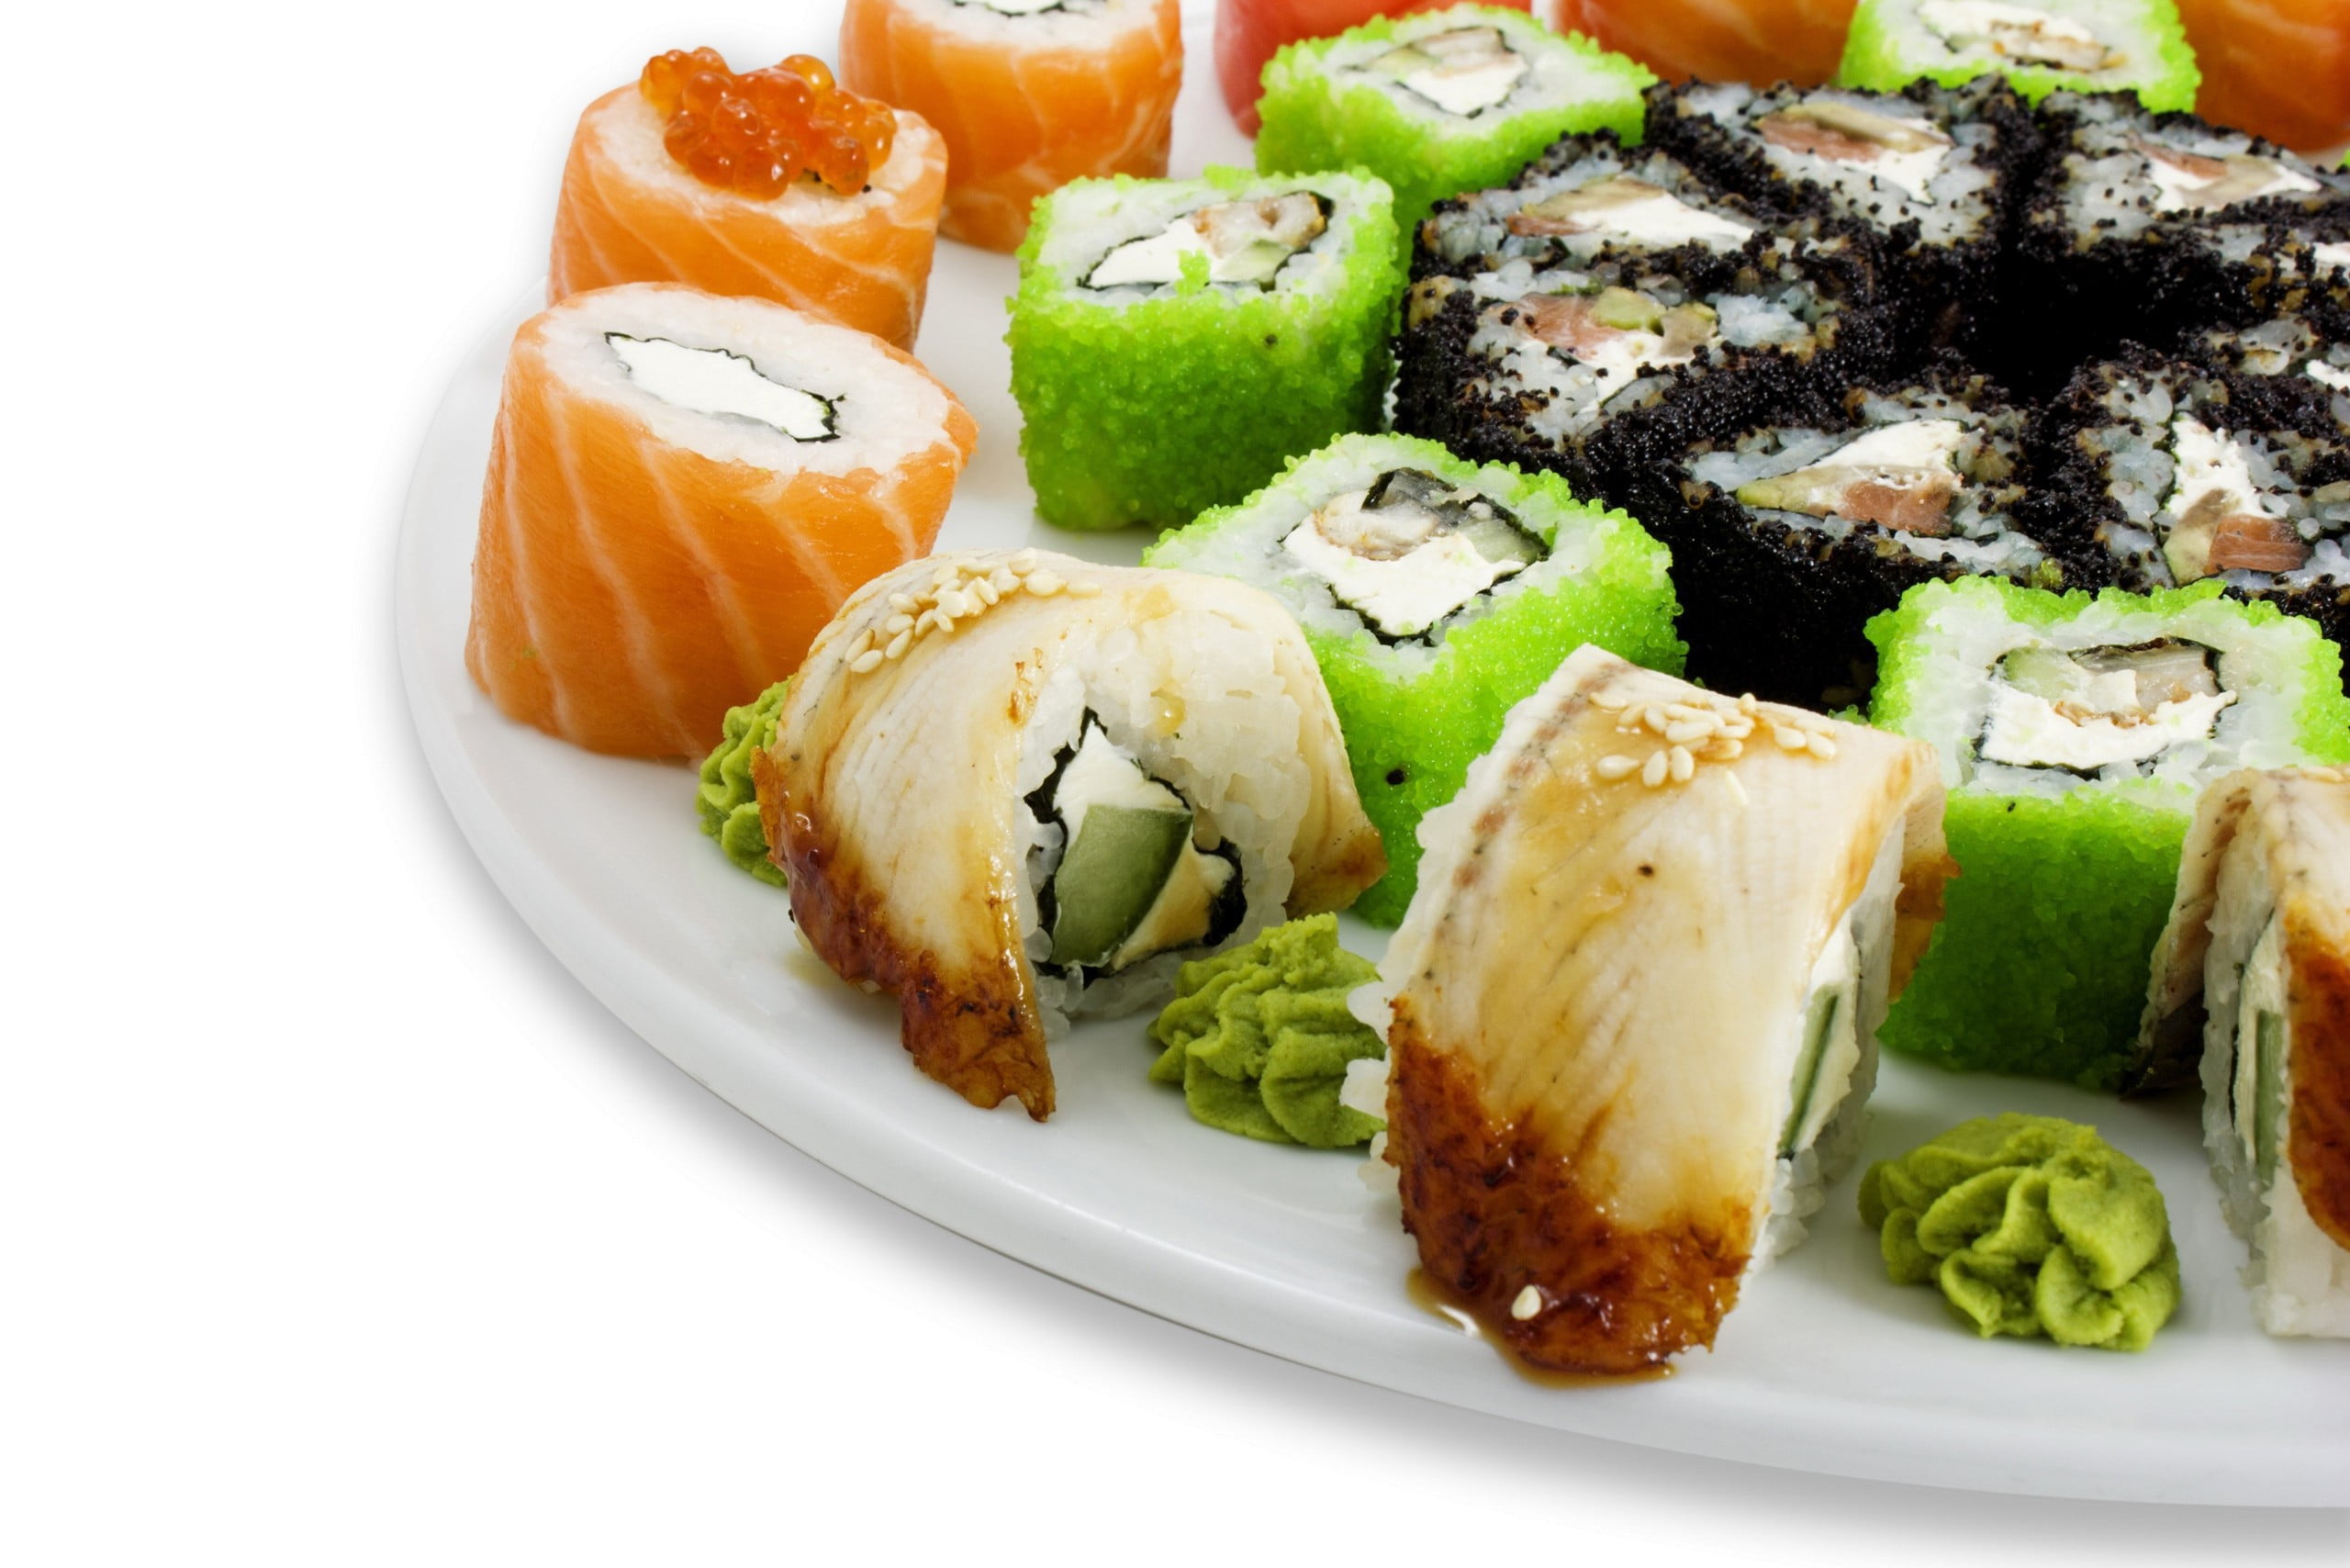 sushi, food, food and drink, healthy eating, ready-to-eat, plate